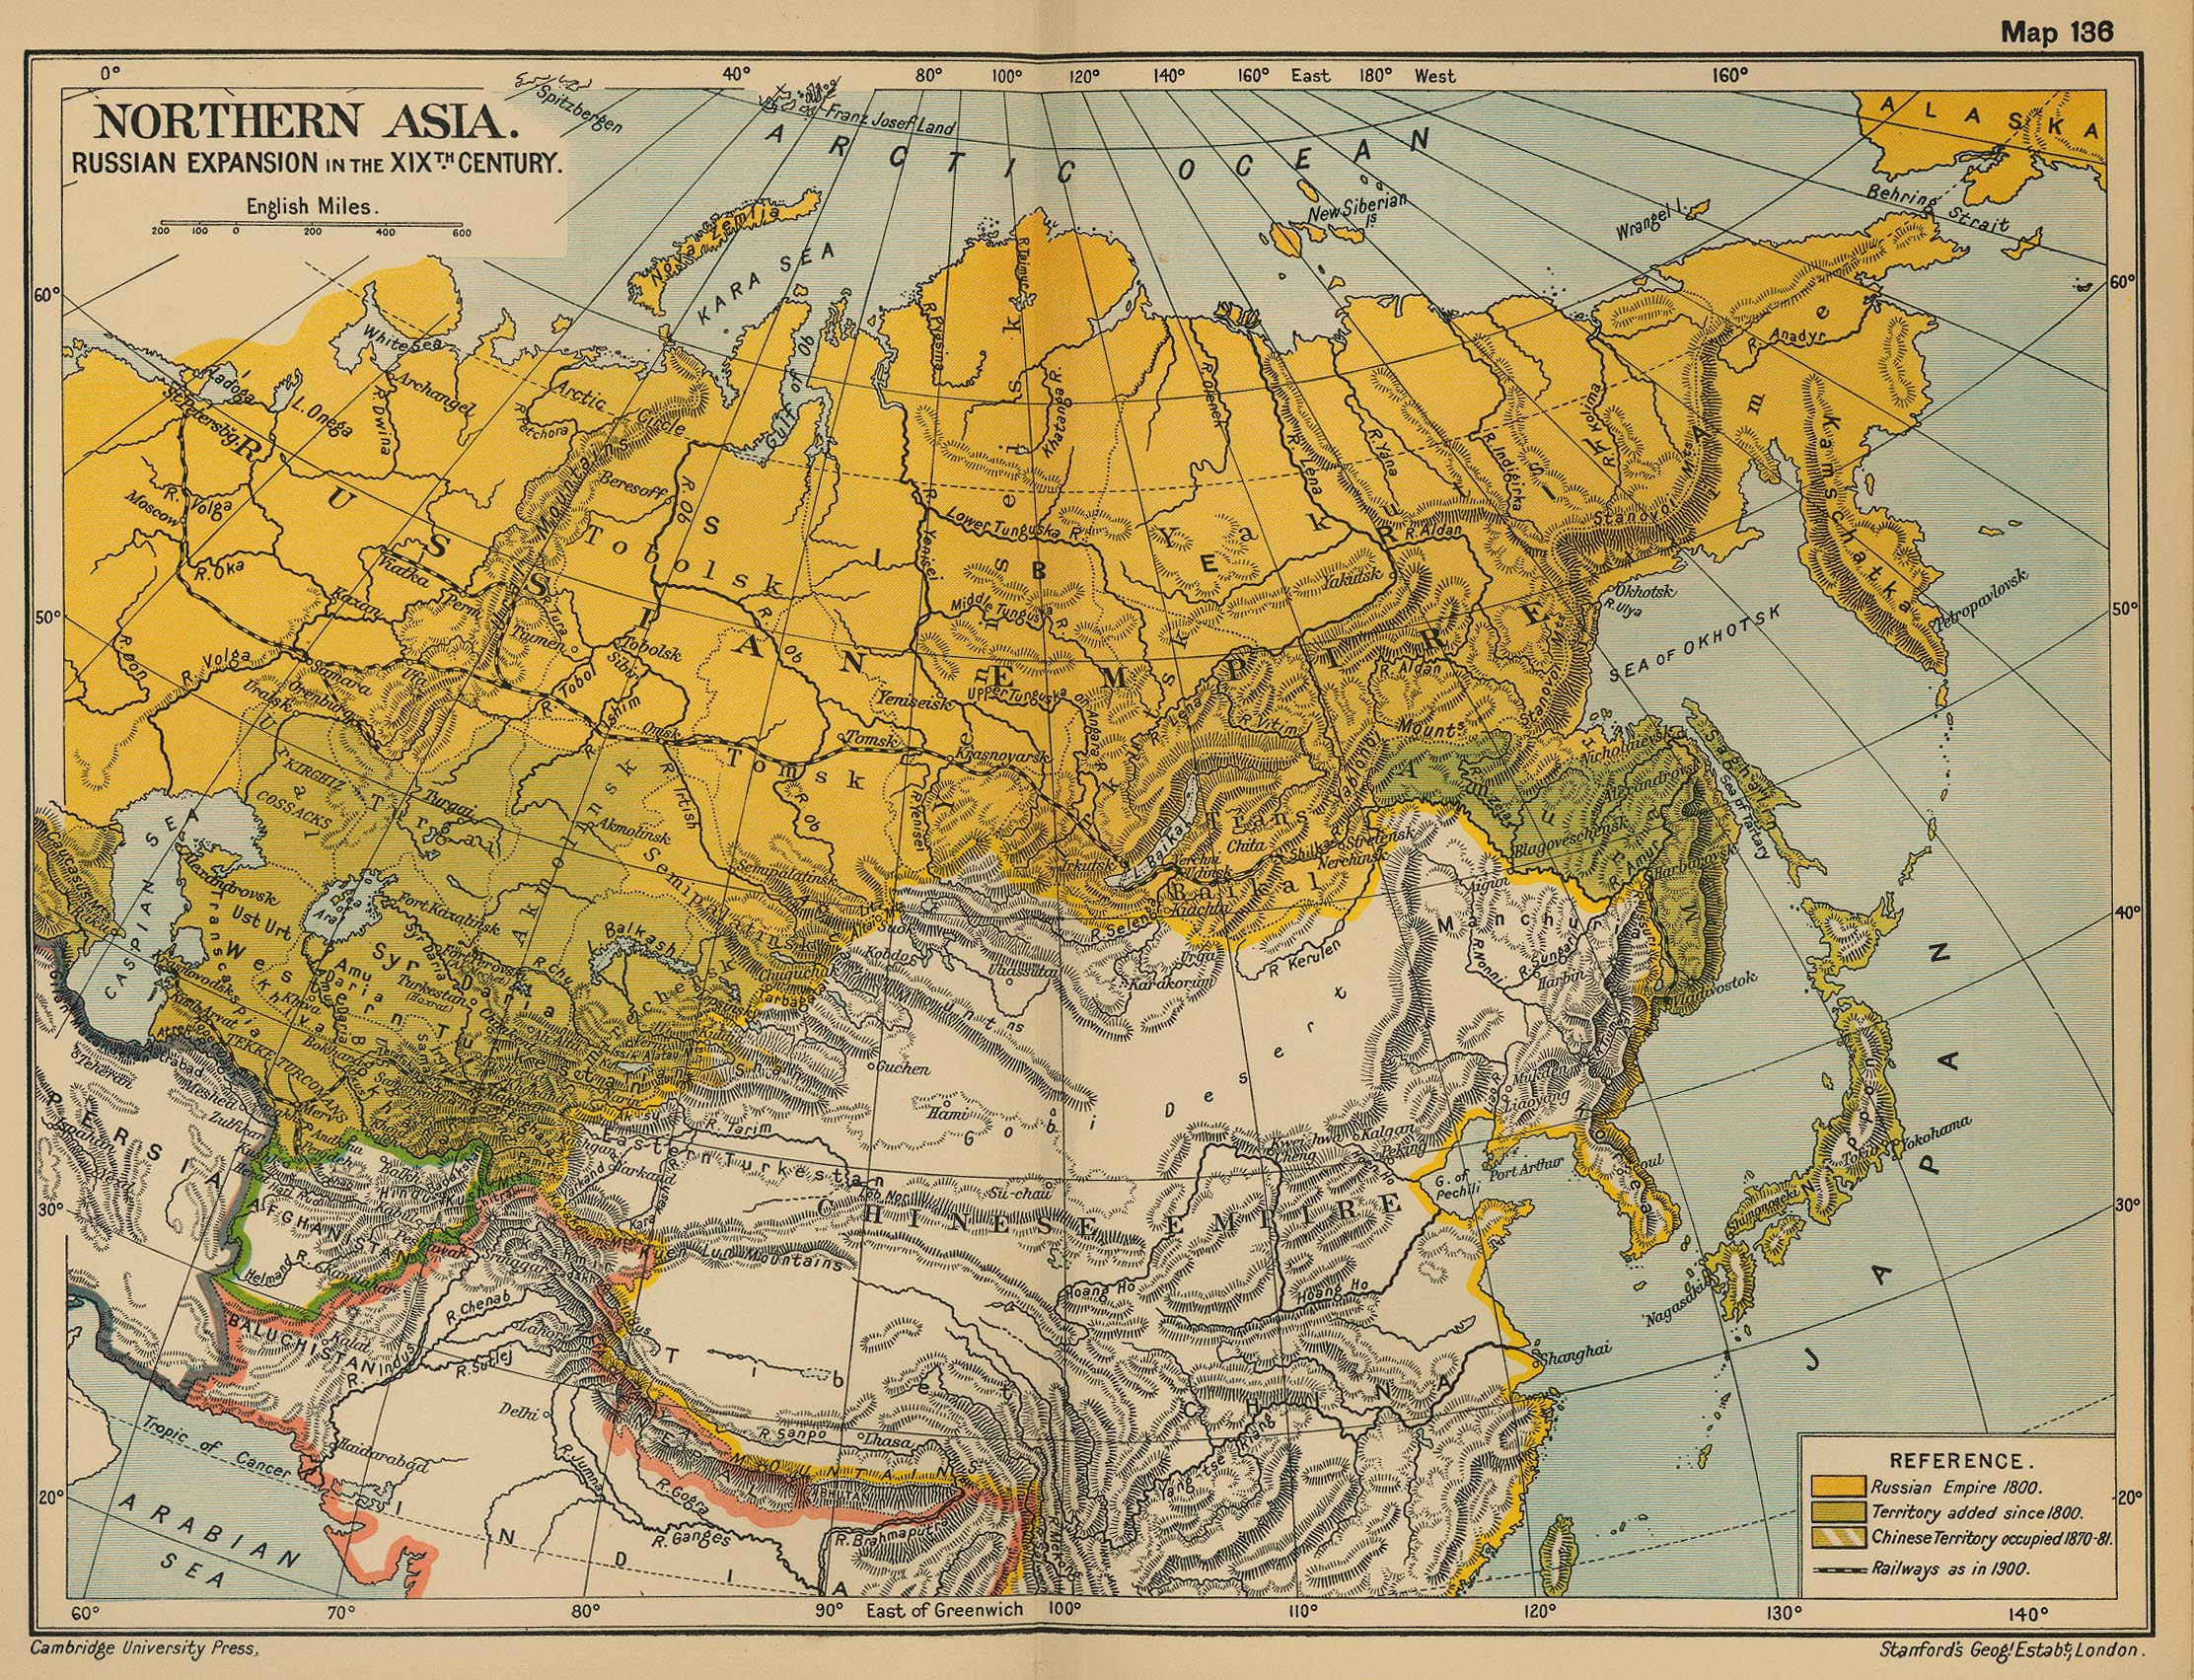 Map of Northern Asia in the 19th Century